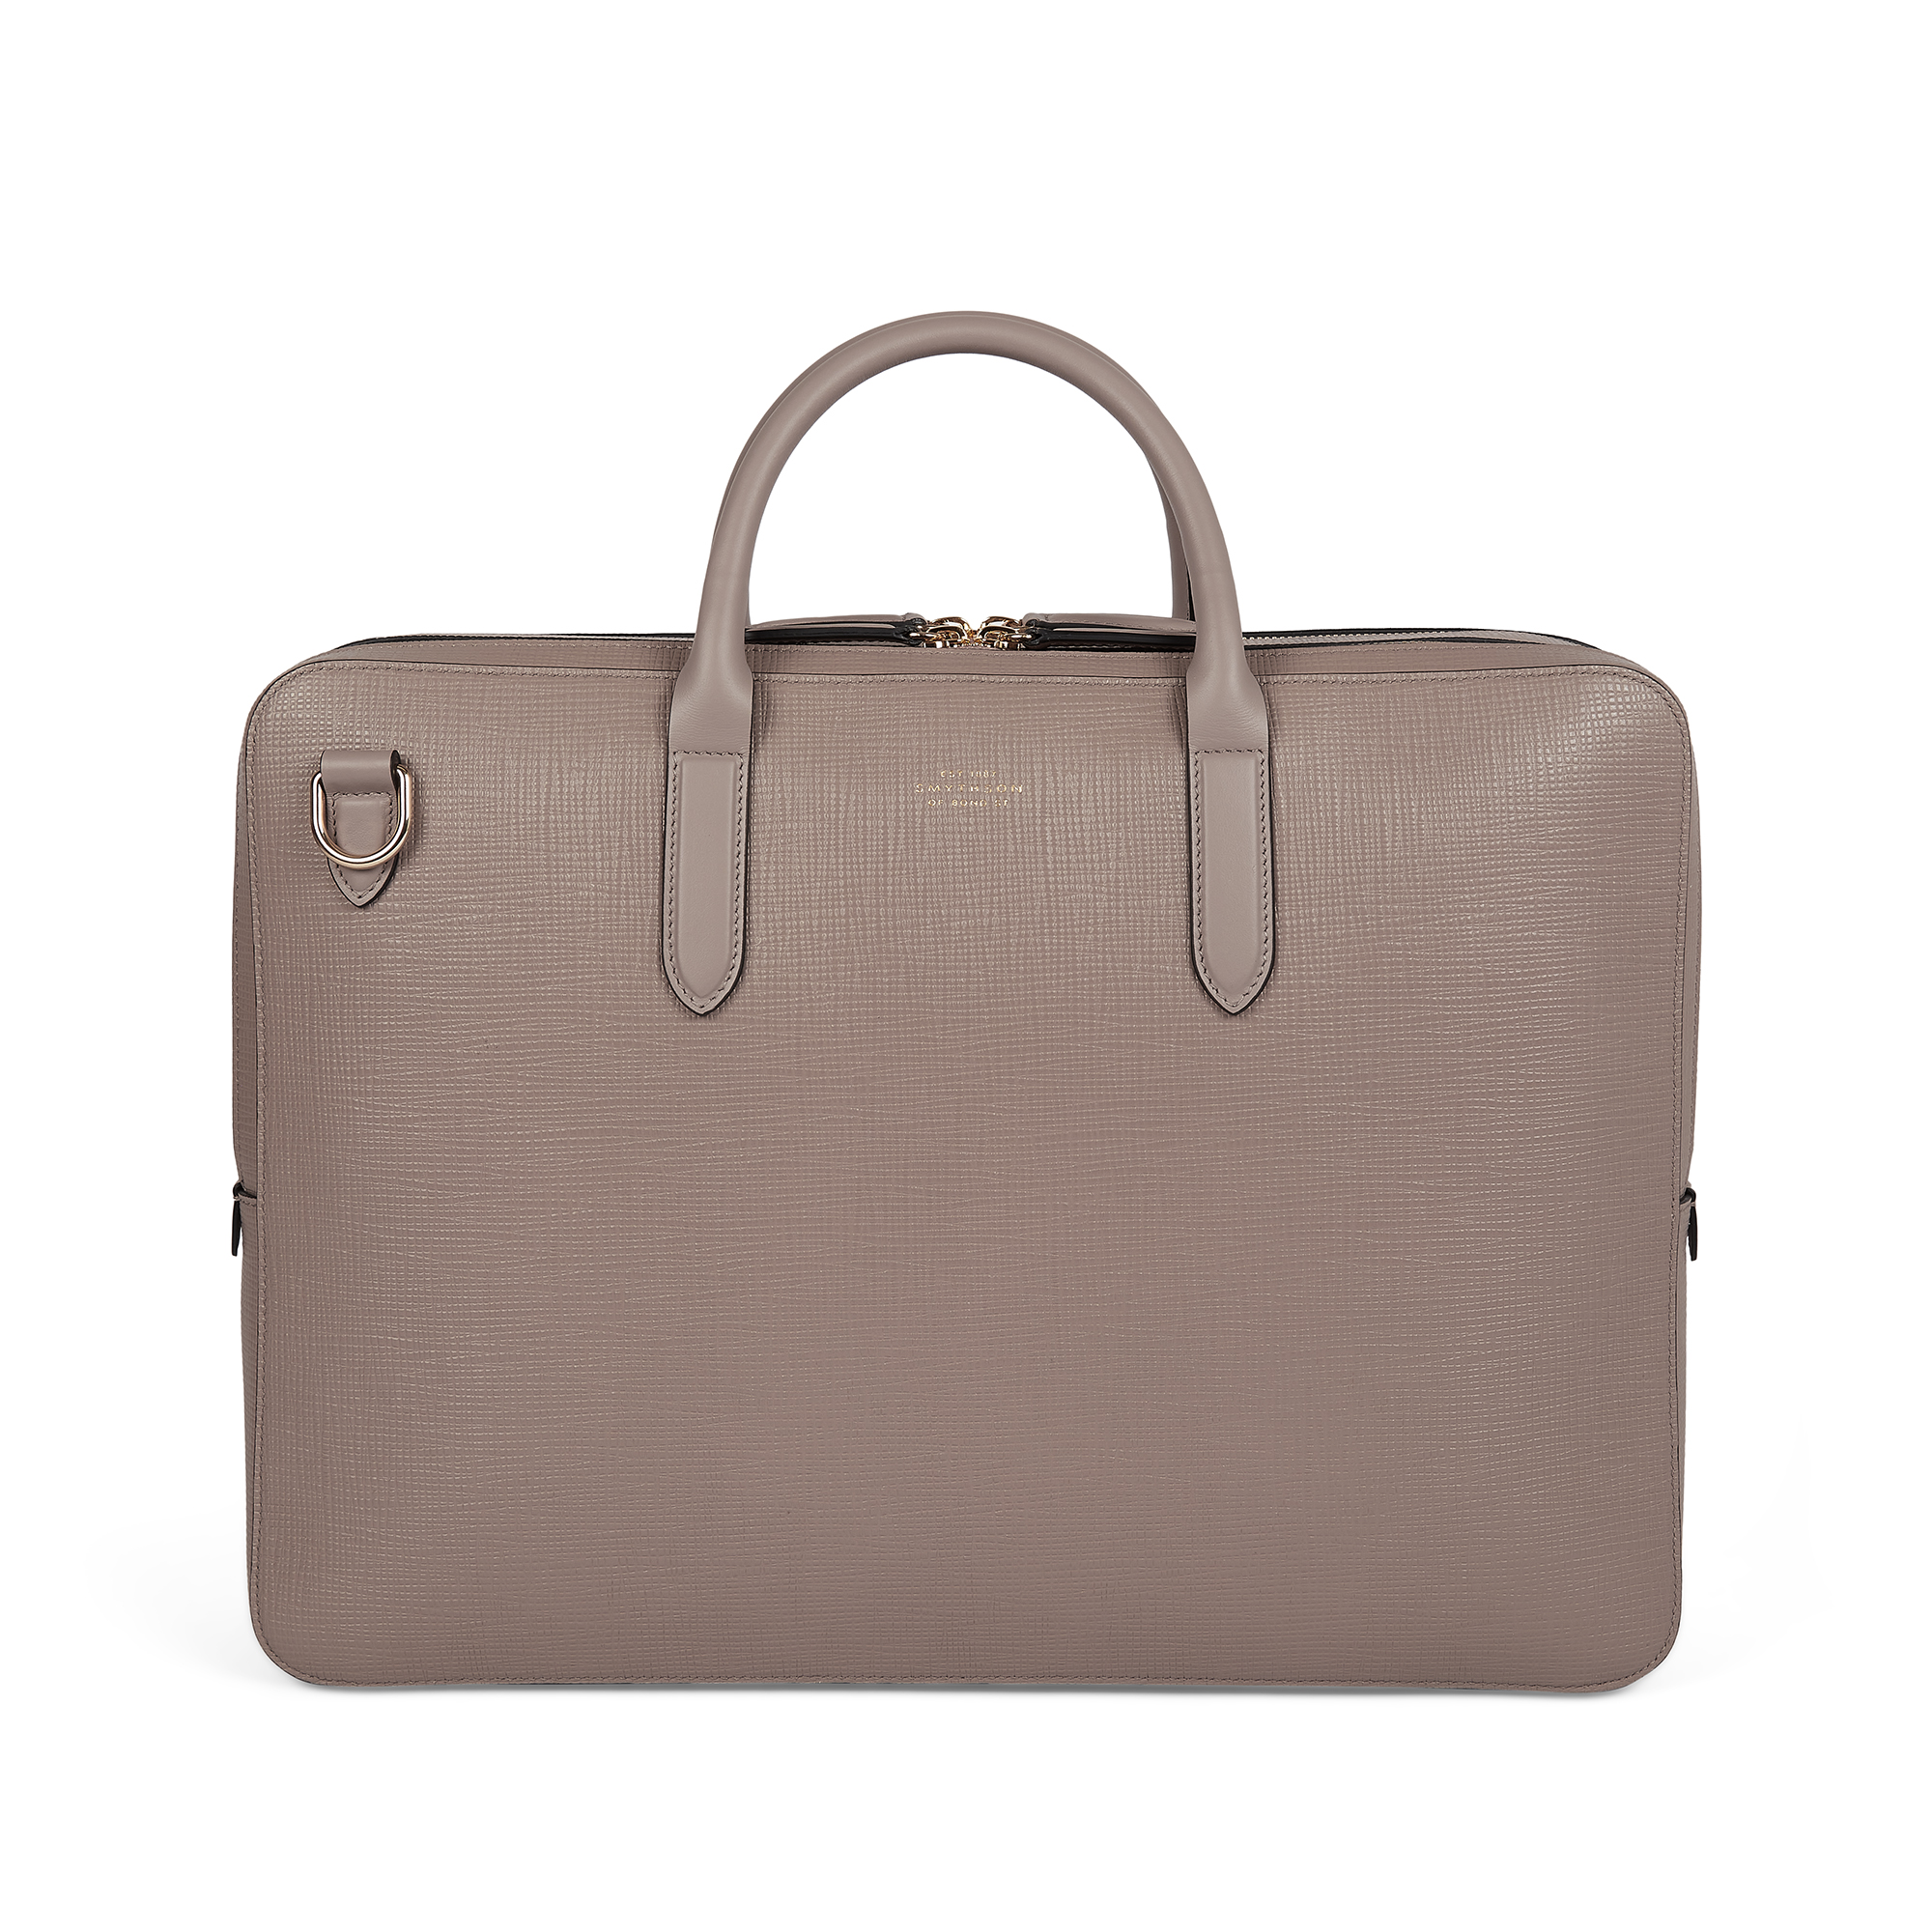 Smythson Lightweight Large Briefcase in Panama  taupe